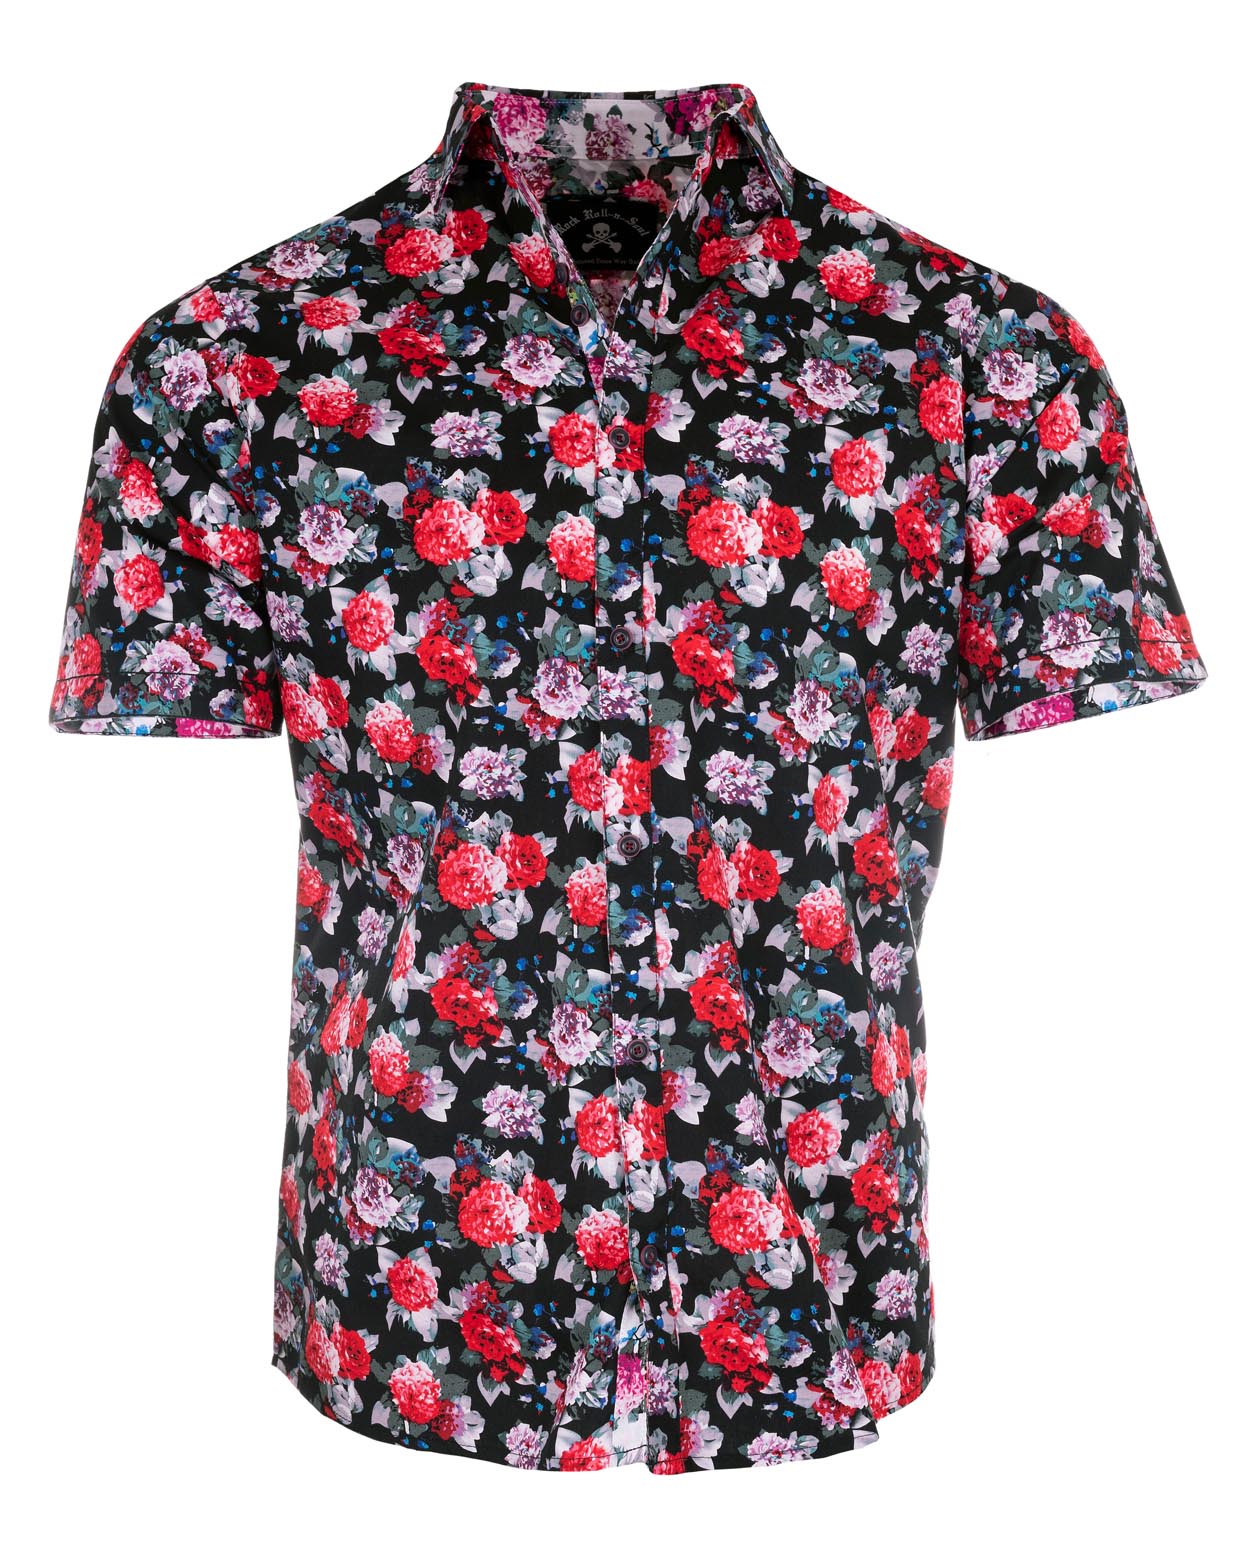 Men's SS Floral Fashion Shirt | Addicted to Love by Rock Roll n Soul